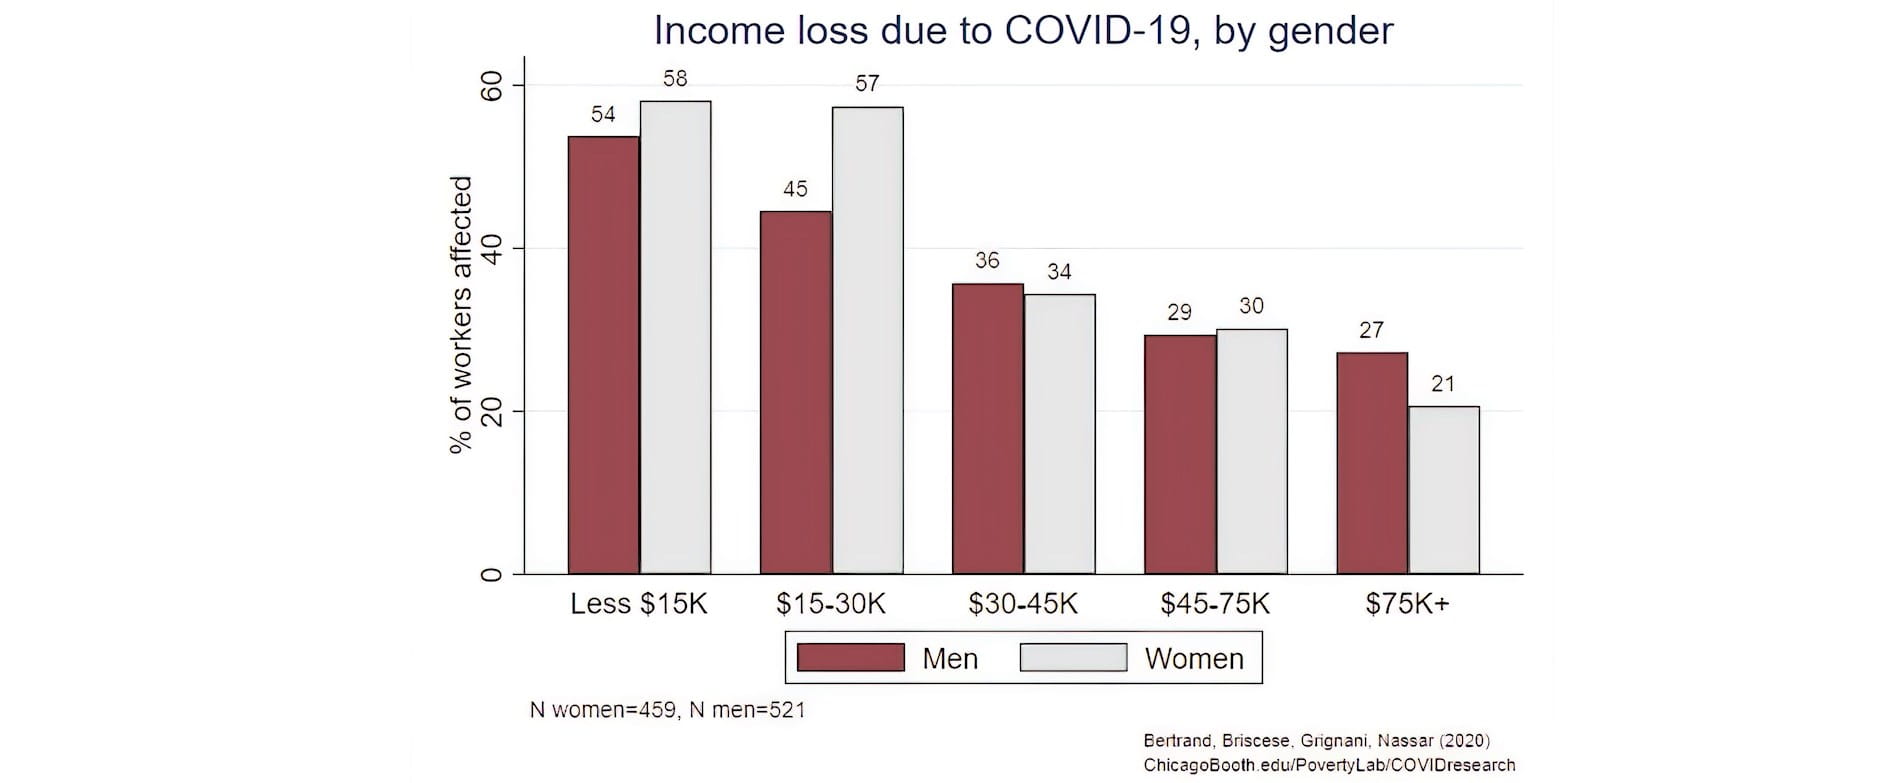 Finding 1 Vertical Bar Graph of Income loss due to COVID-19, by gender